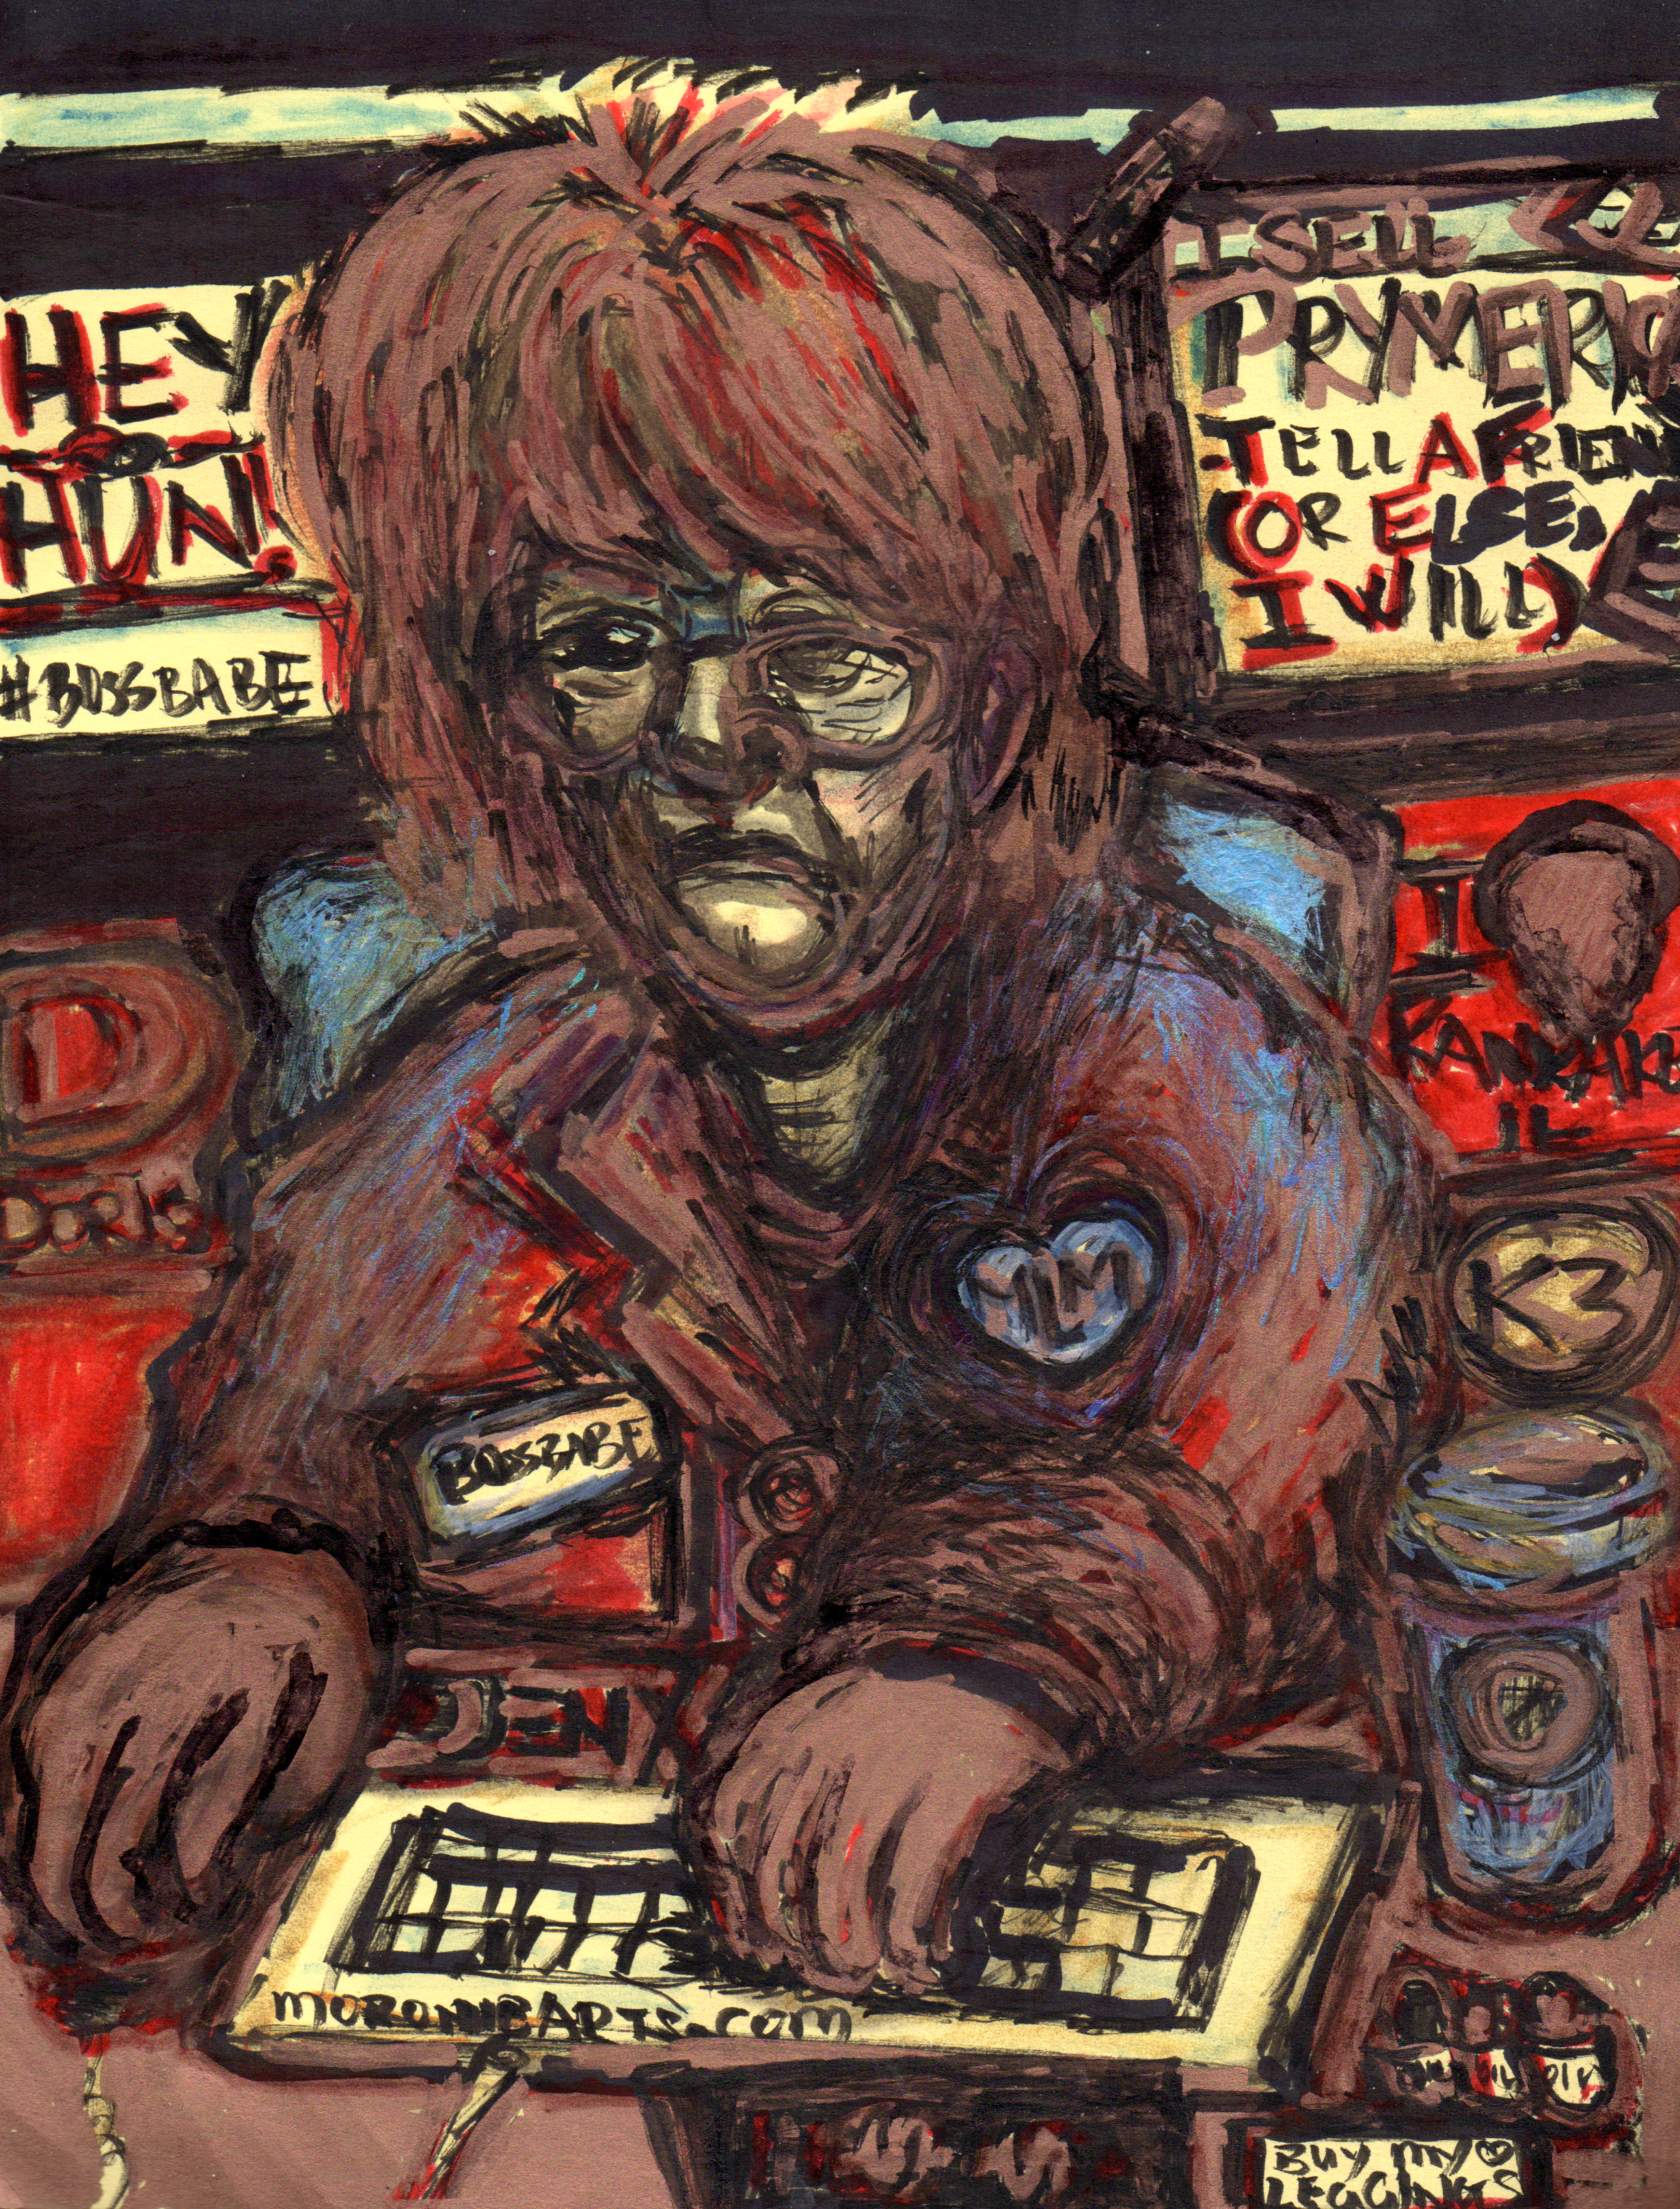 A full-color cartoon of an elderly woman sitting at her computer. 
Text: Hey hun. I sell Prymerica. Tell a friend (or else I will.) 